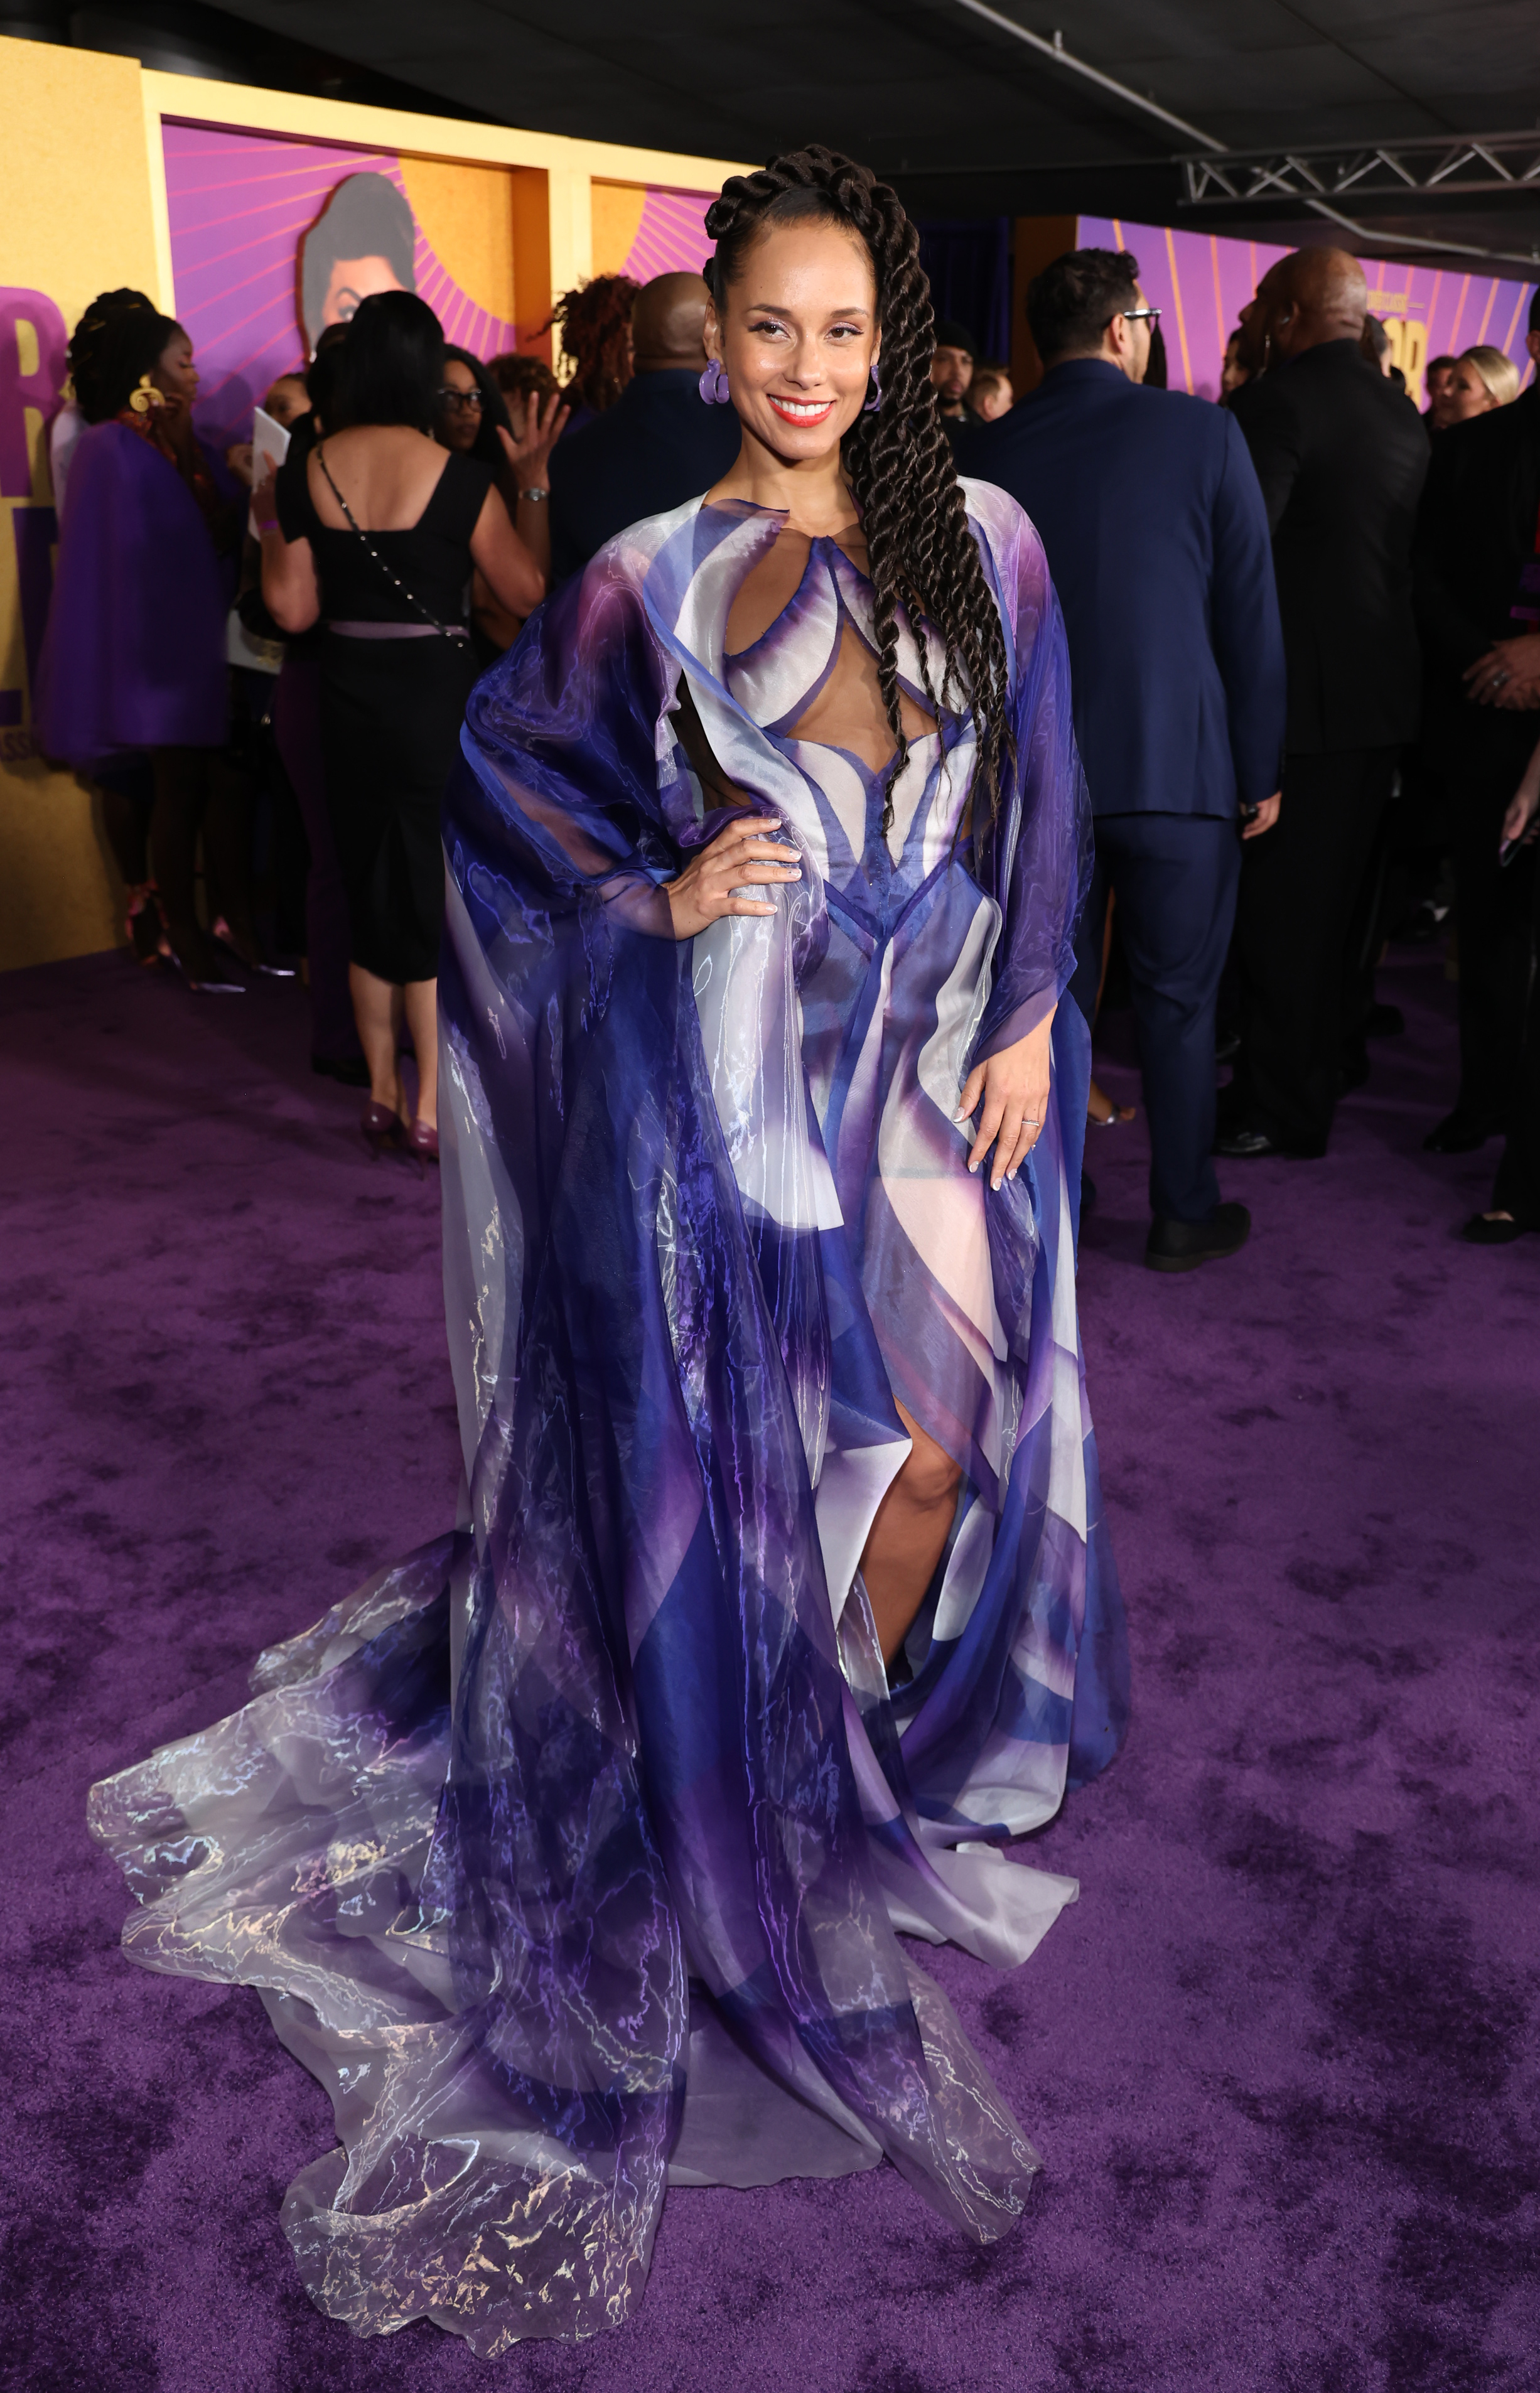 Alicia in a purple, blue, and white print gown with long flowing sleeves and a train